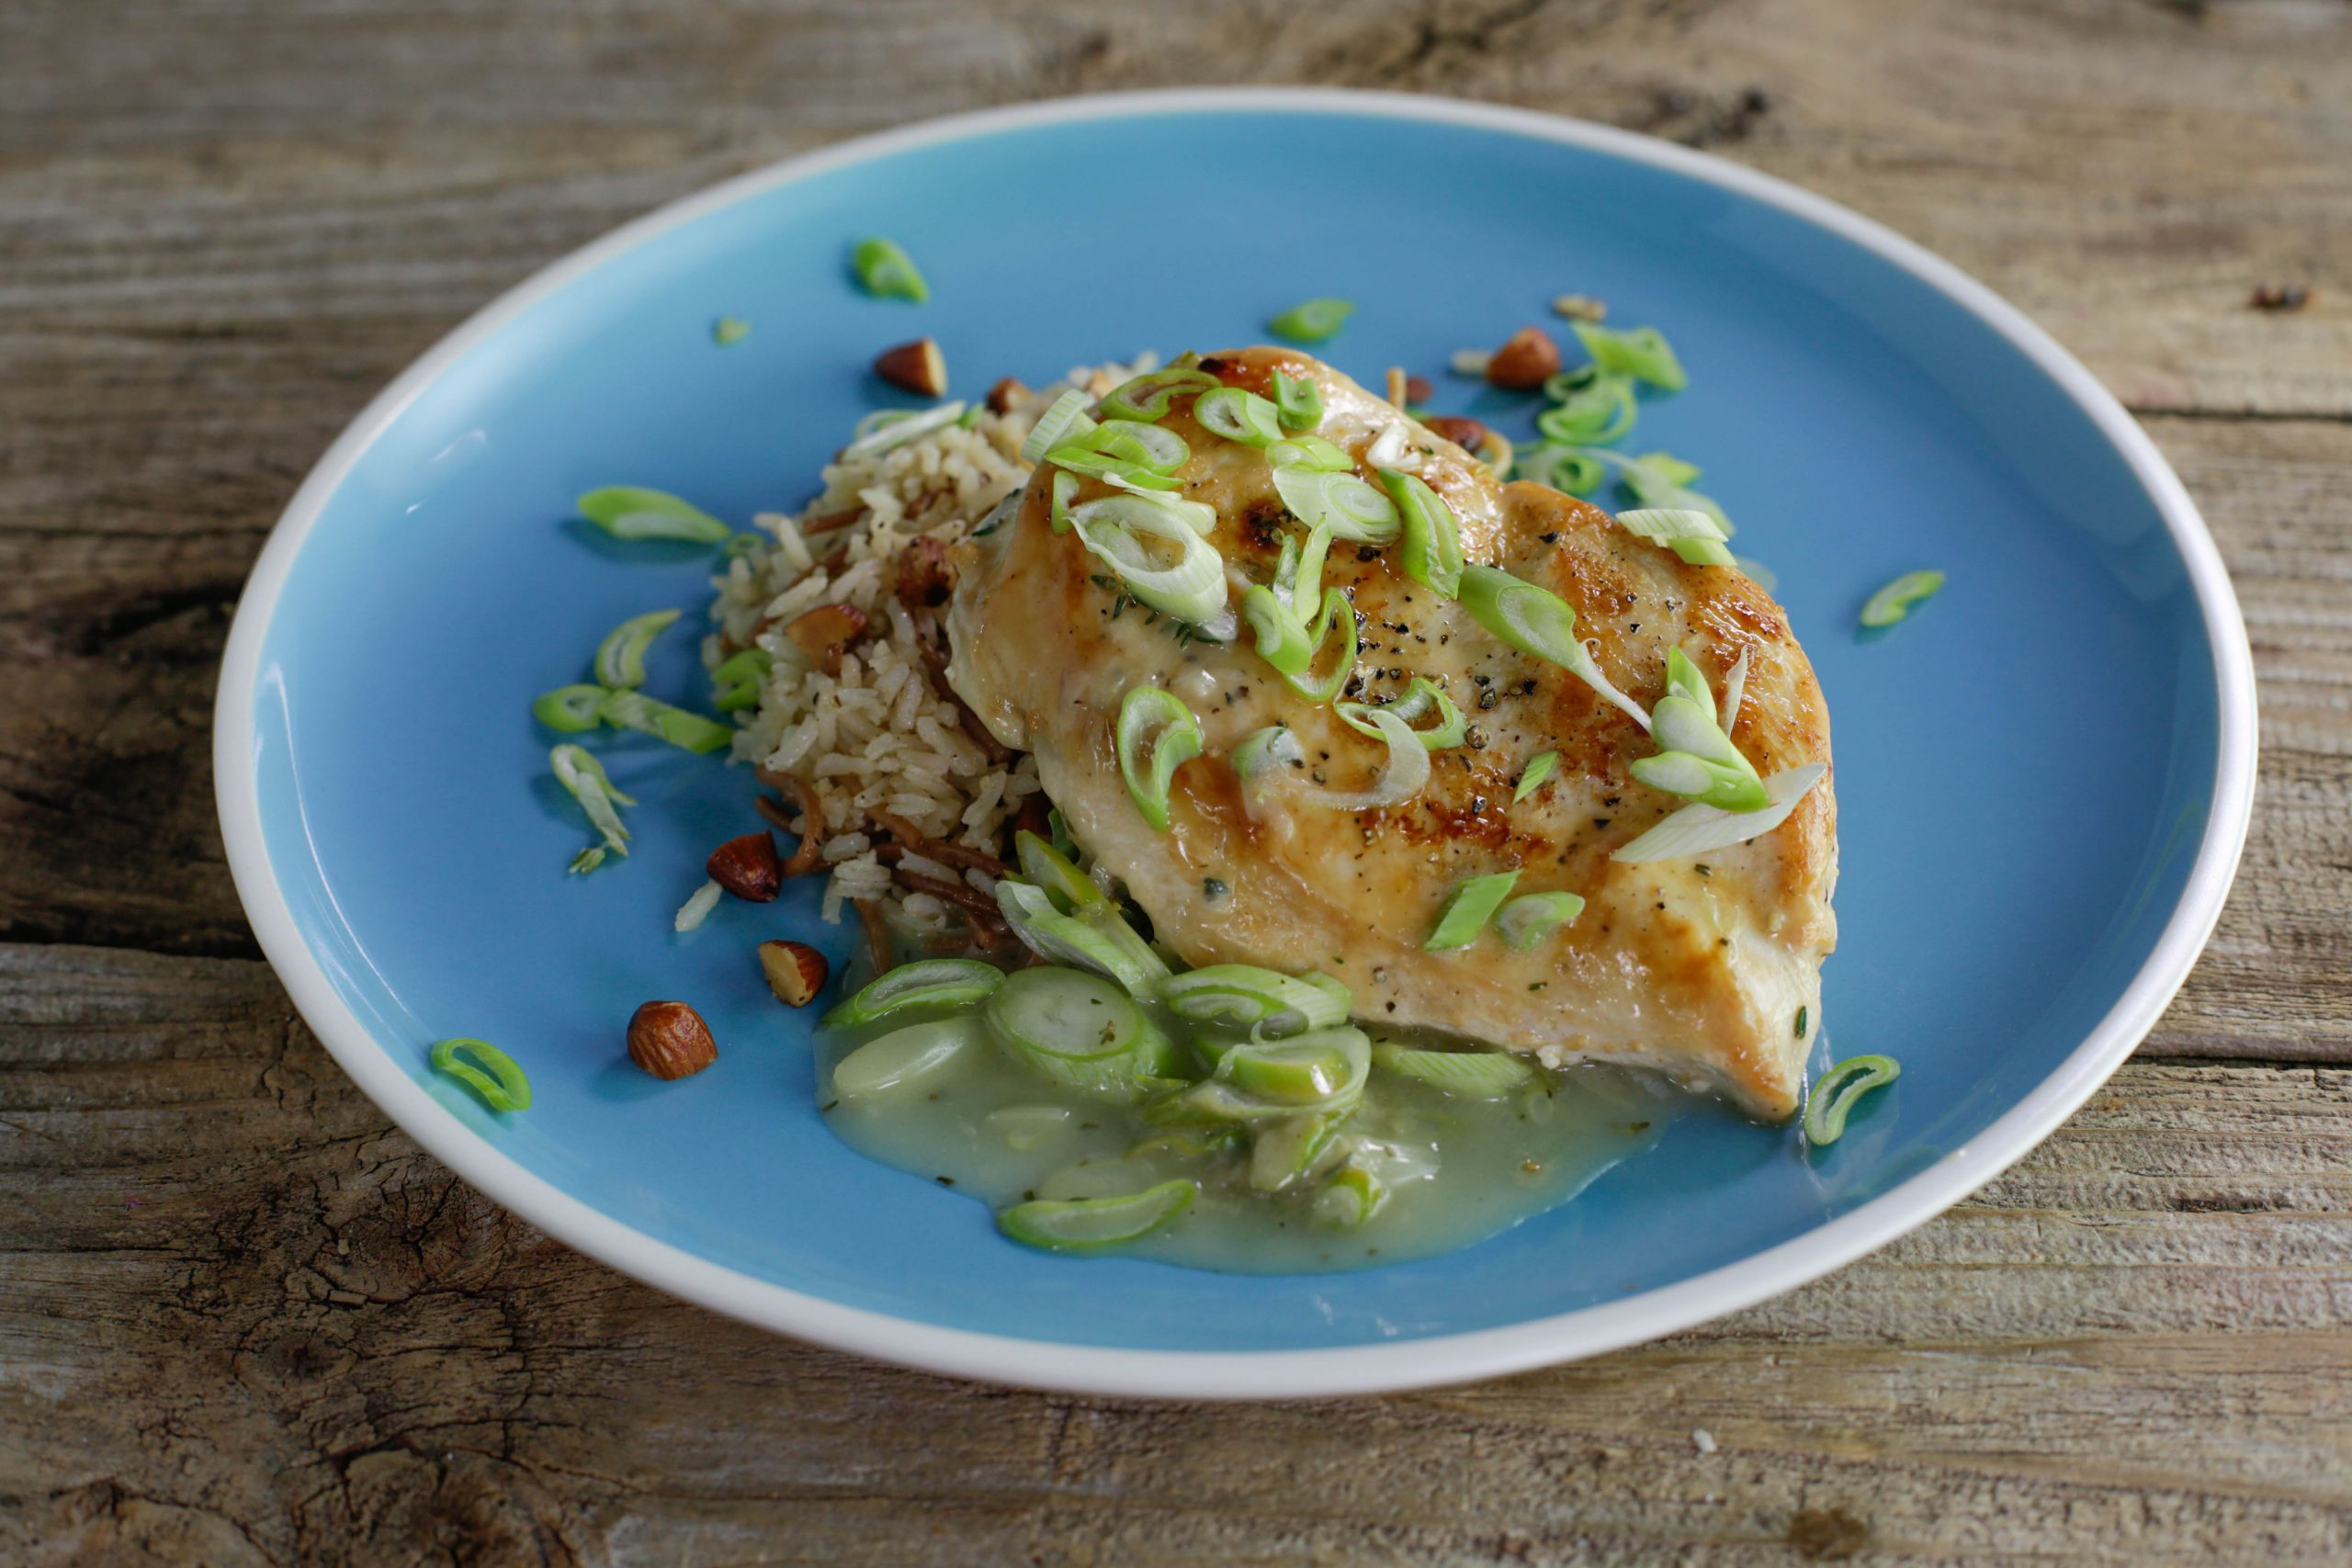 Rice Pilaf Recipe Rachael Ray
 Spring ion Chicken Breasts and Rice Pilaf with Almonds